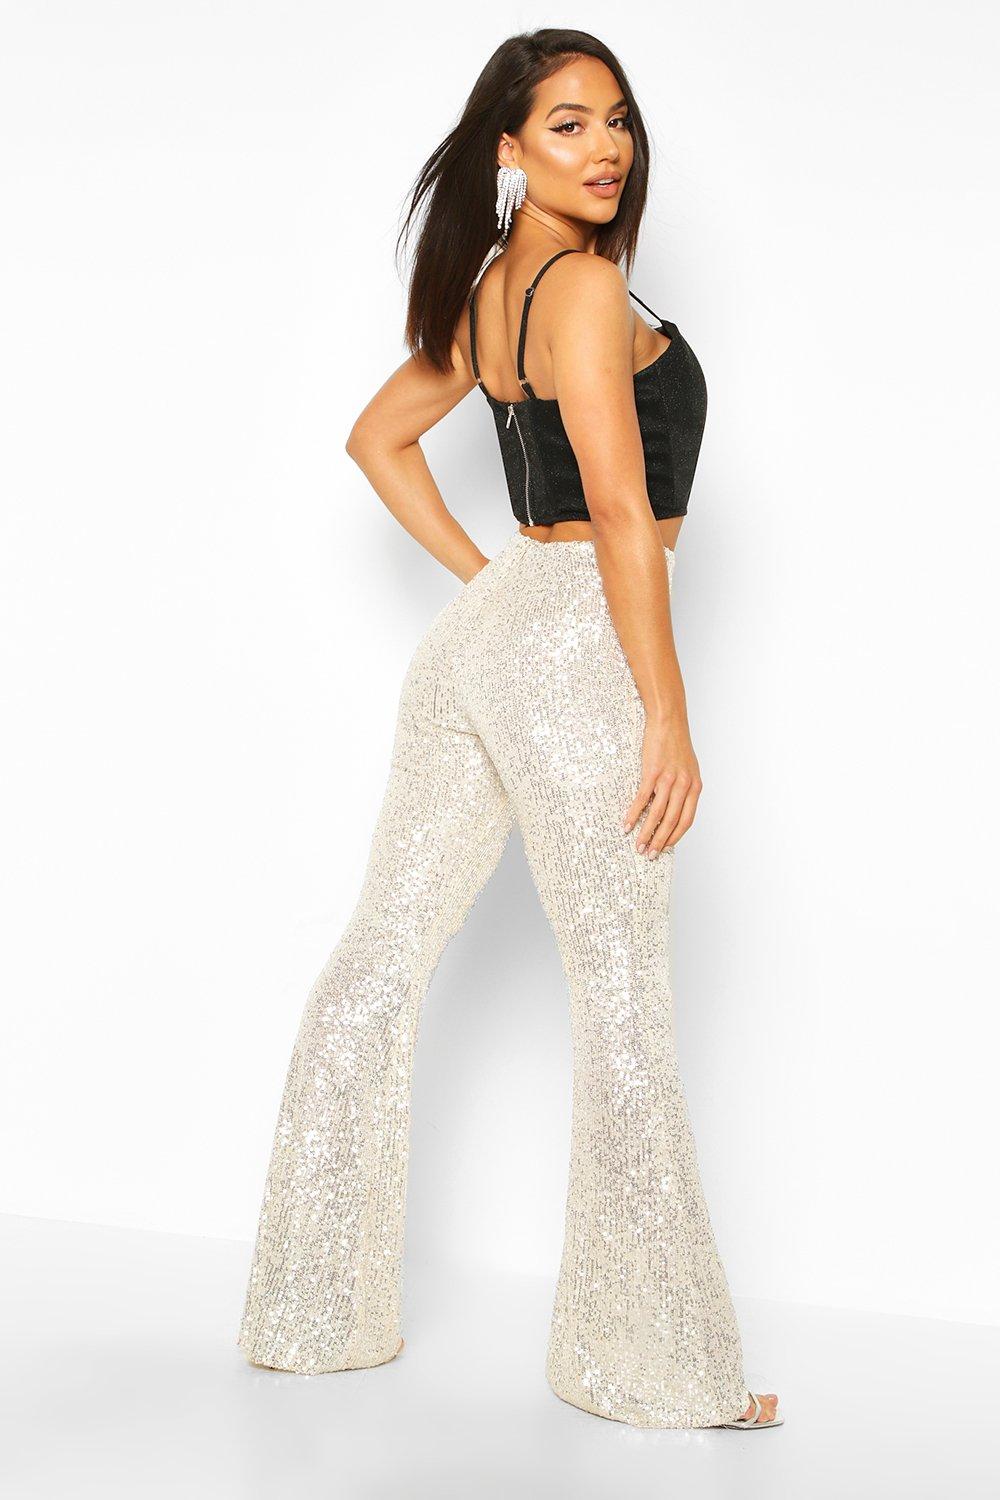 MOD SEQUIN FLARE PANT in black